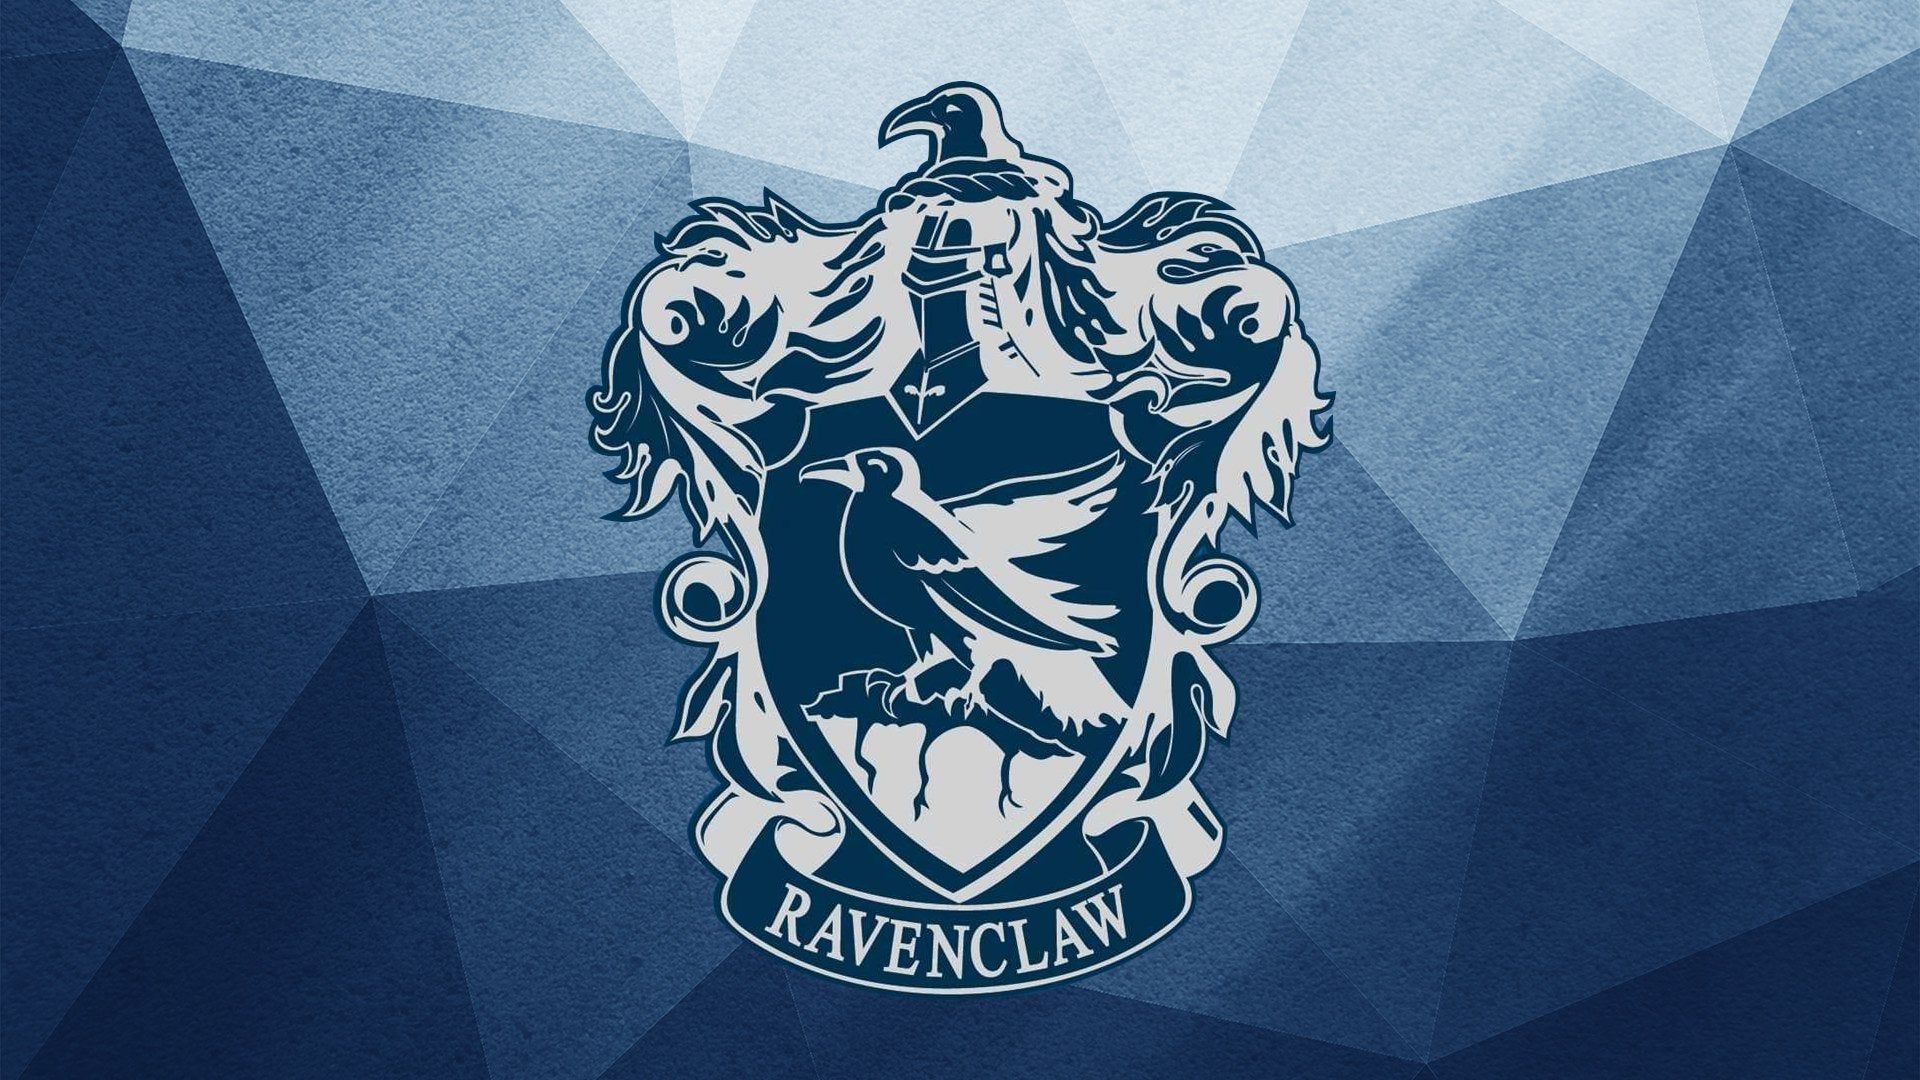 Couldn't find a ravenclaw wallpaper i liked so i threw one. Harry potter wallpaper phone, Harry potter ravenclaw outfits, Ravenclaw